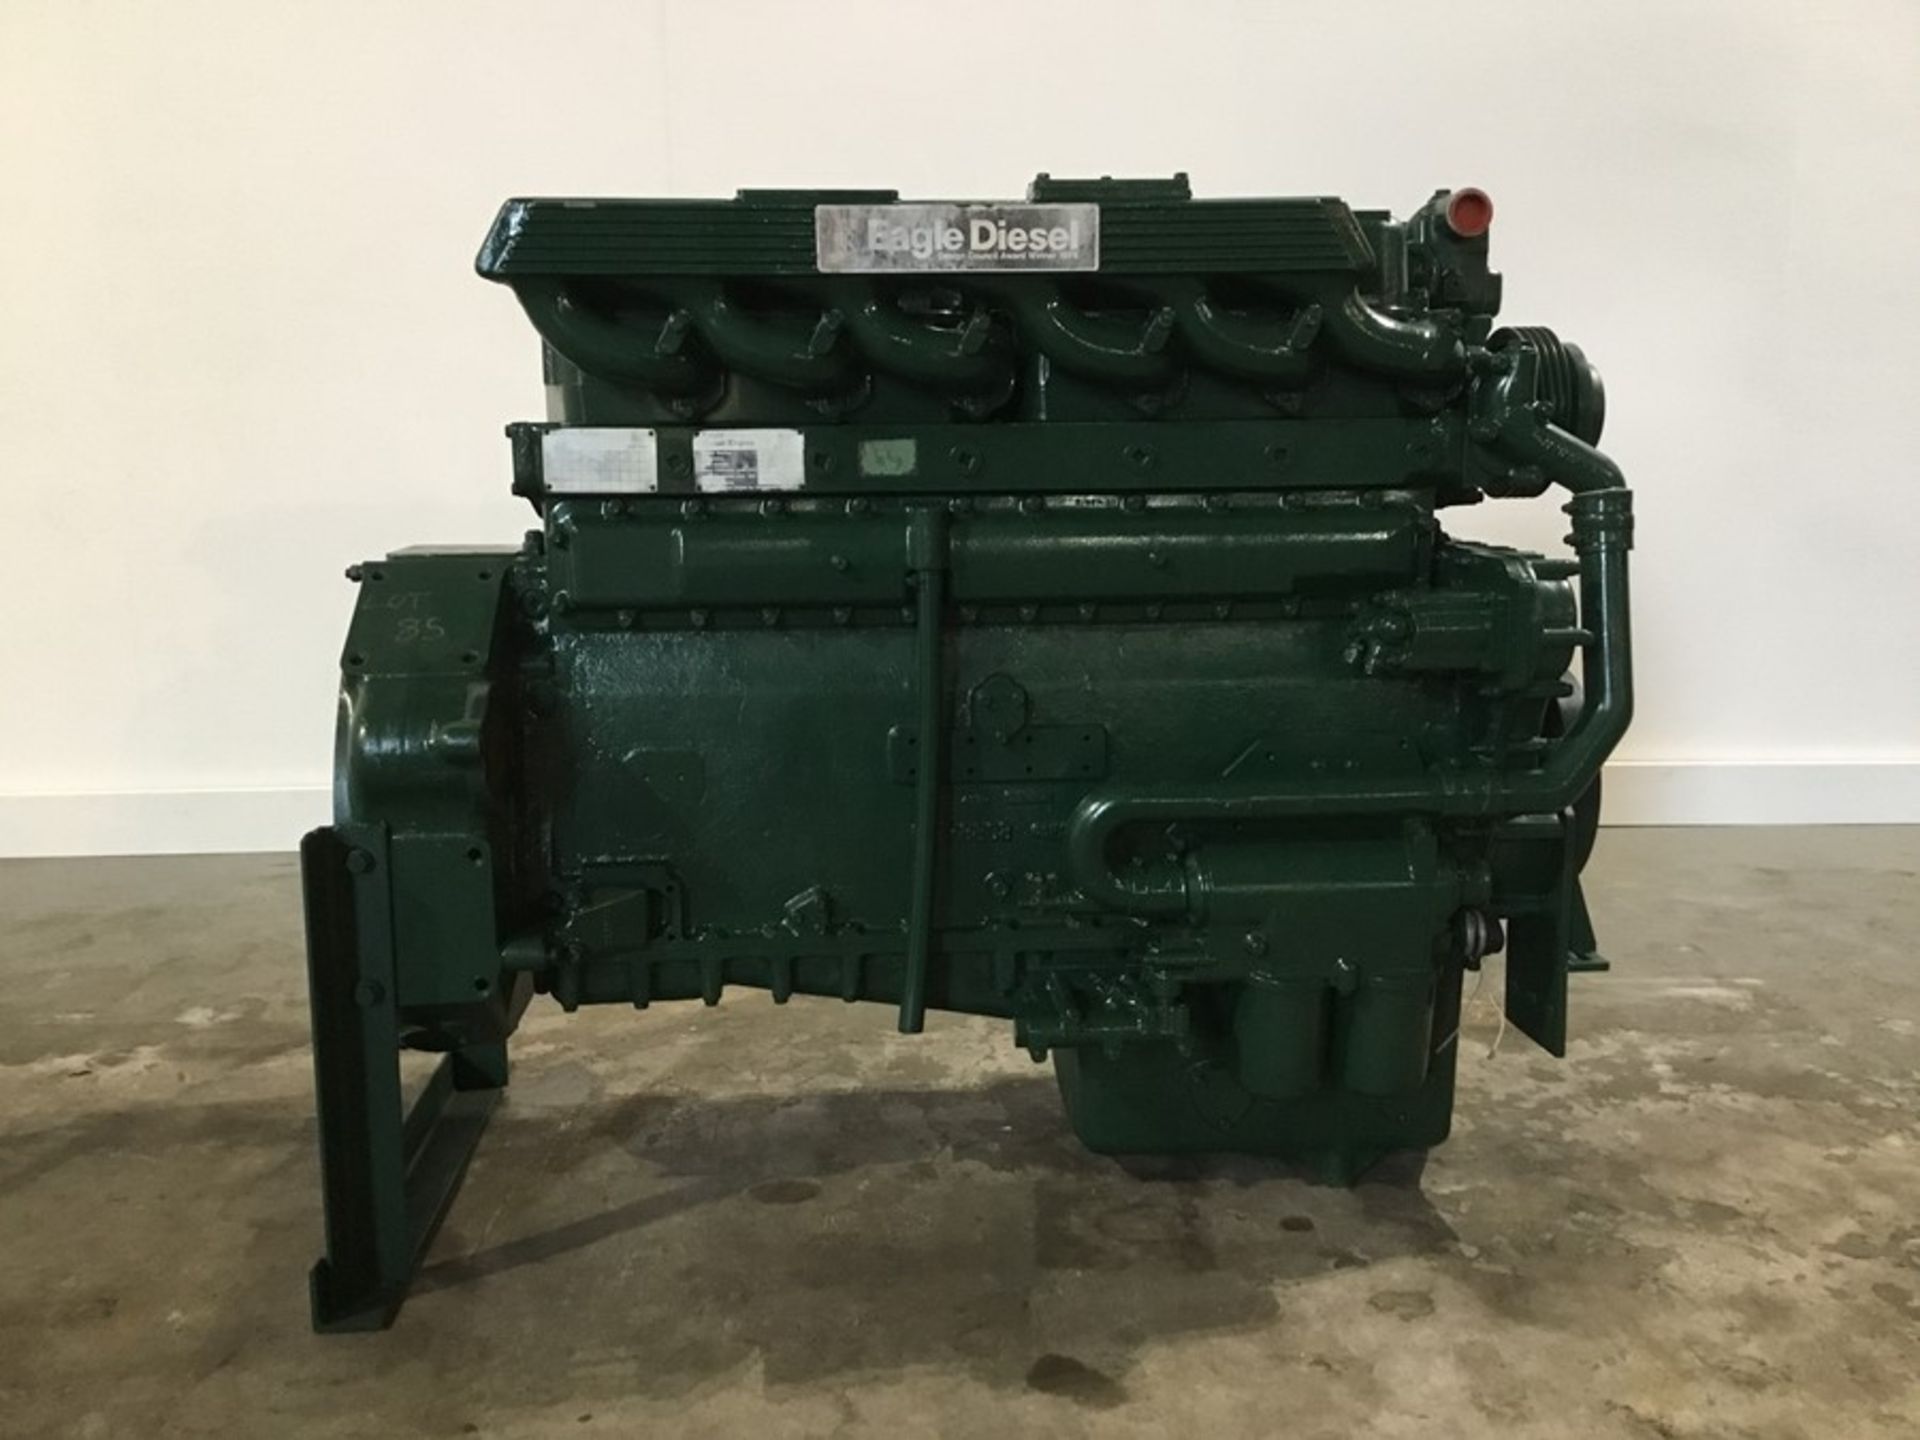 Rolls Royce E220 Diesel engine: Rolls Royce E220 6cyl Serial Number 628223D870/44359 build - Image 2 of 18